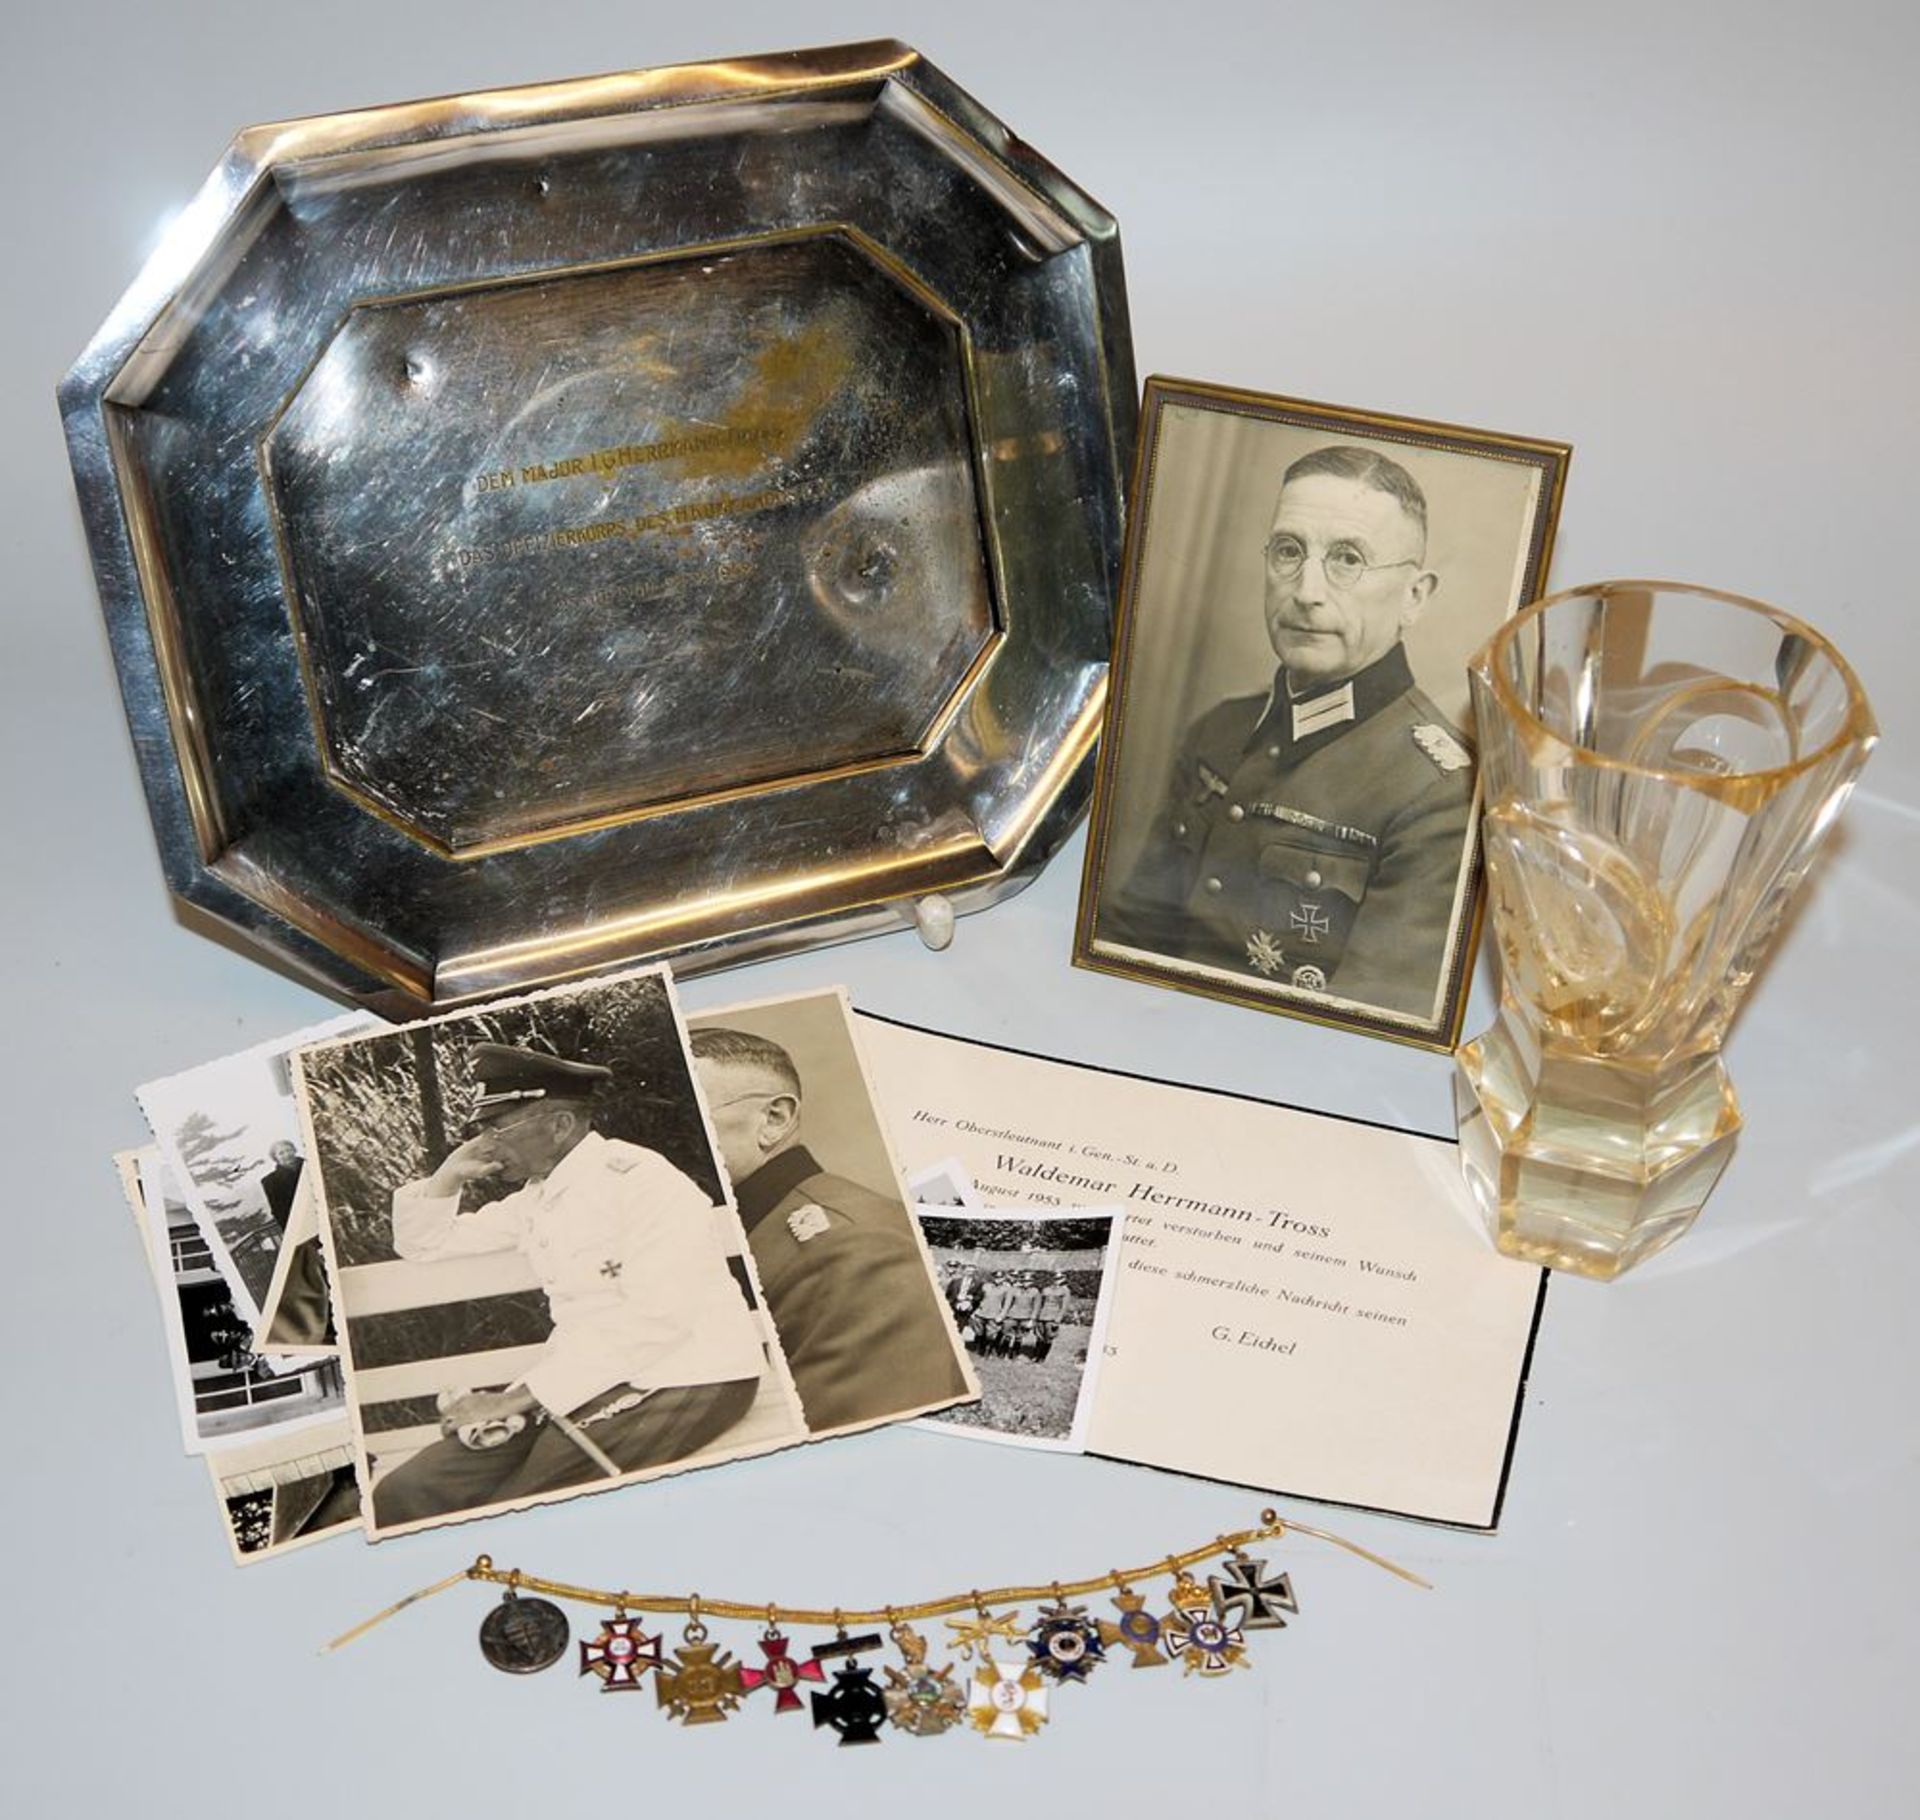 Officer's estate of WW1 & WW2 with large miniature medal chain, EK1 and photographs - Image 6 of 6